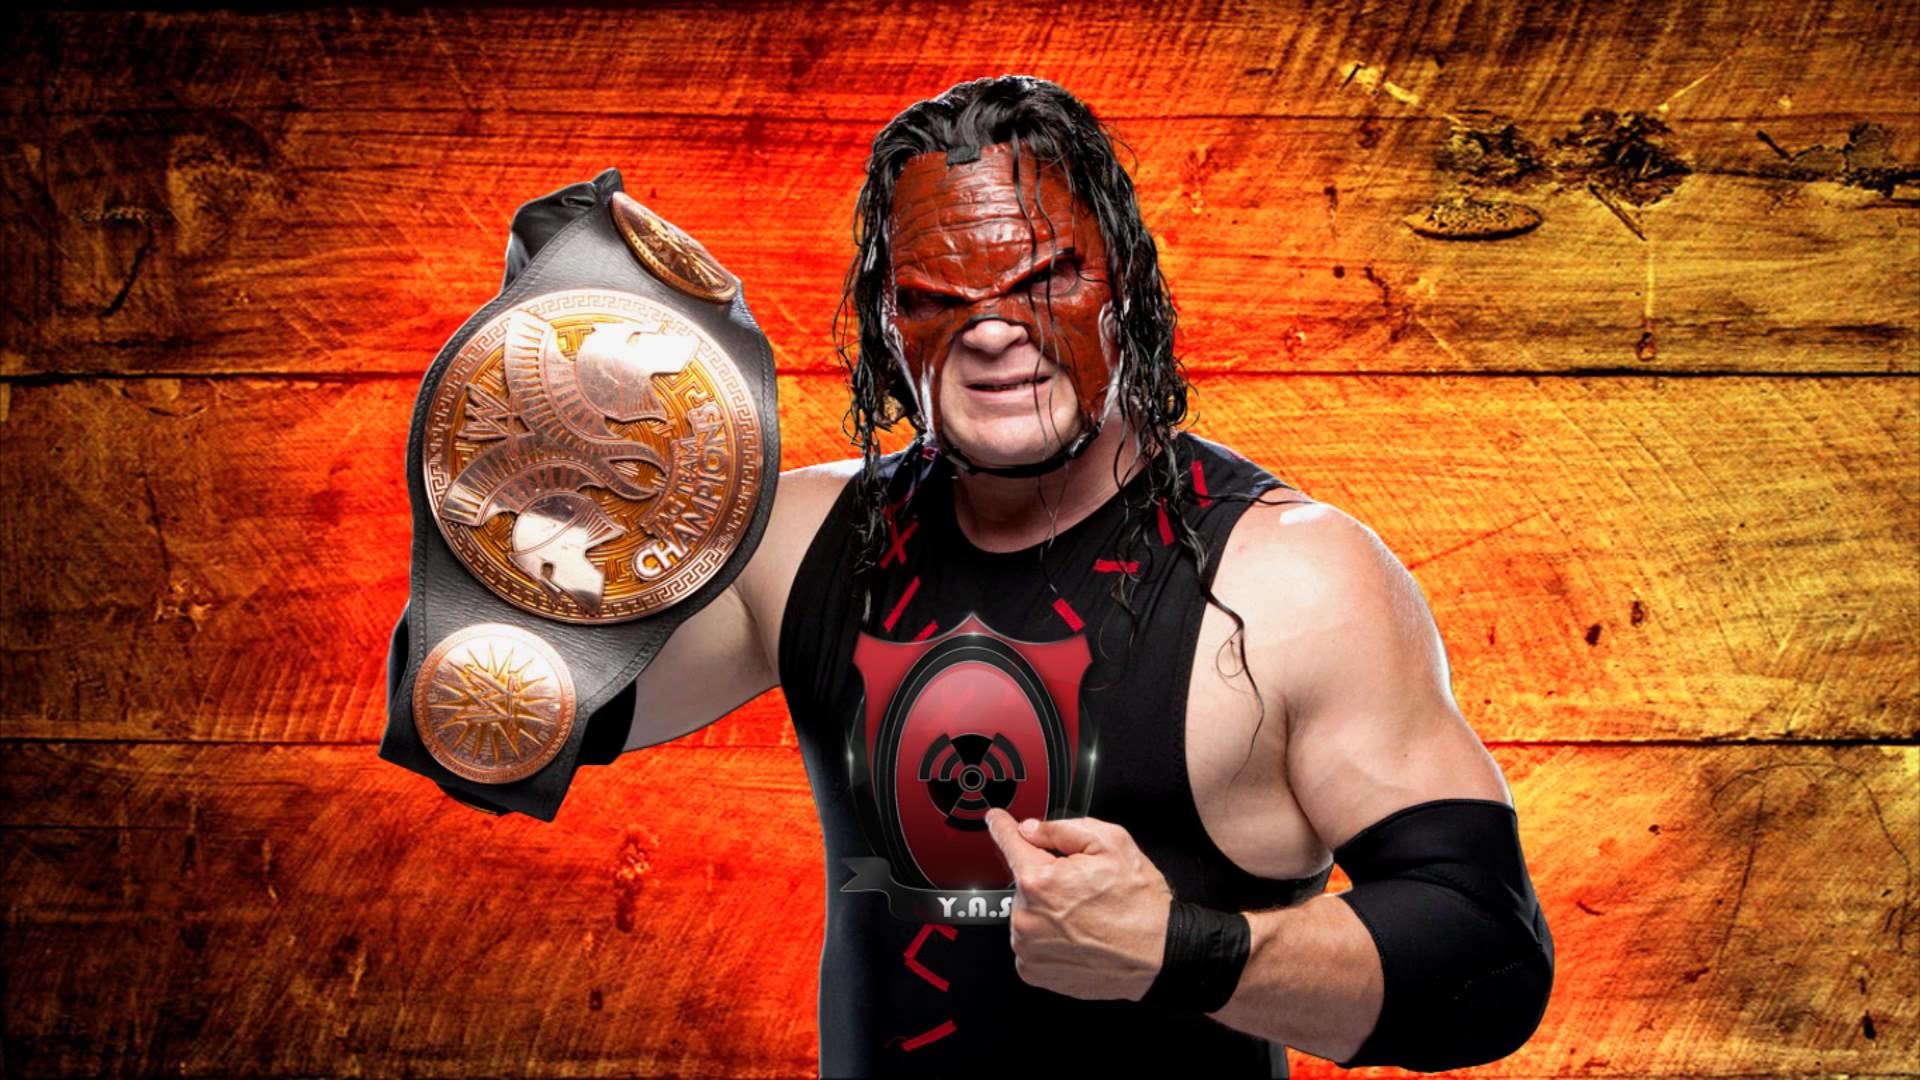 1920x1080 Official Theme - 2011-2012: Kane 6th WWE Theme Song - Veil of Fire